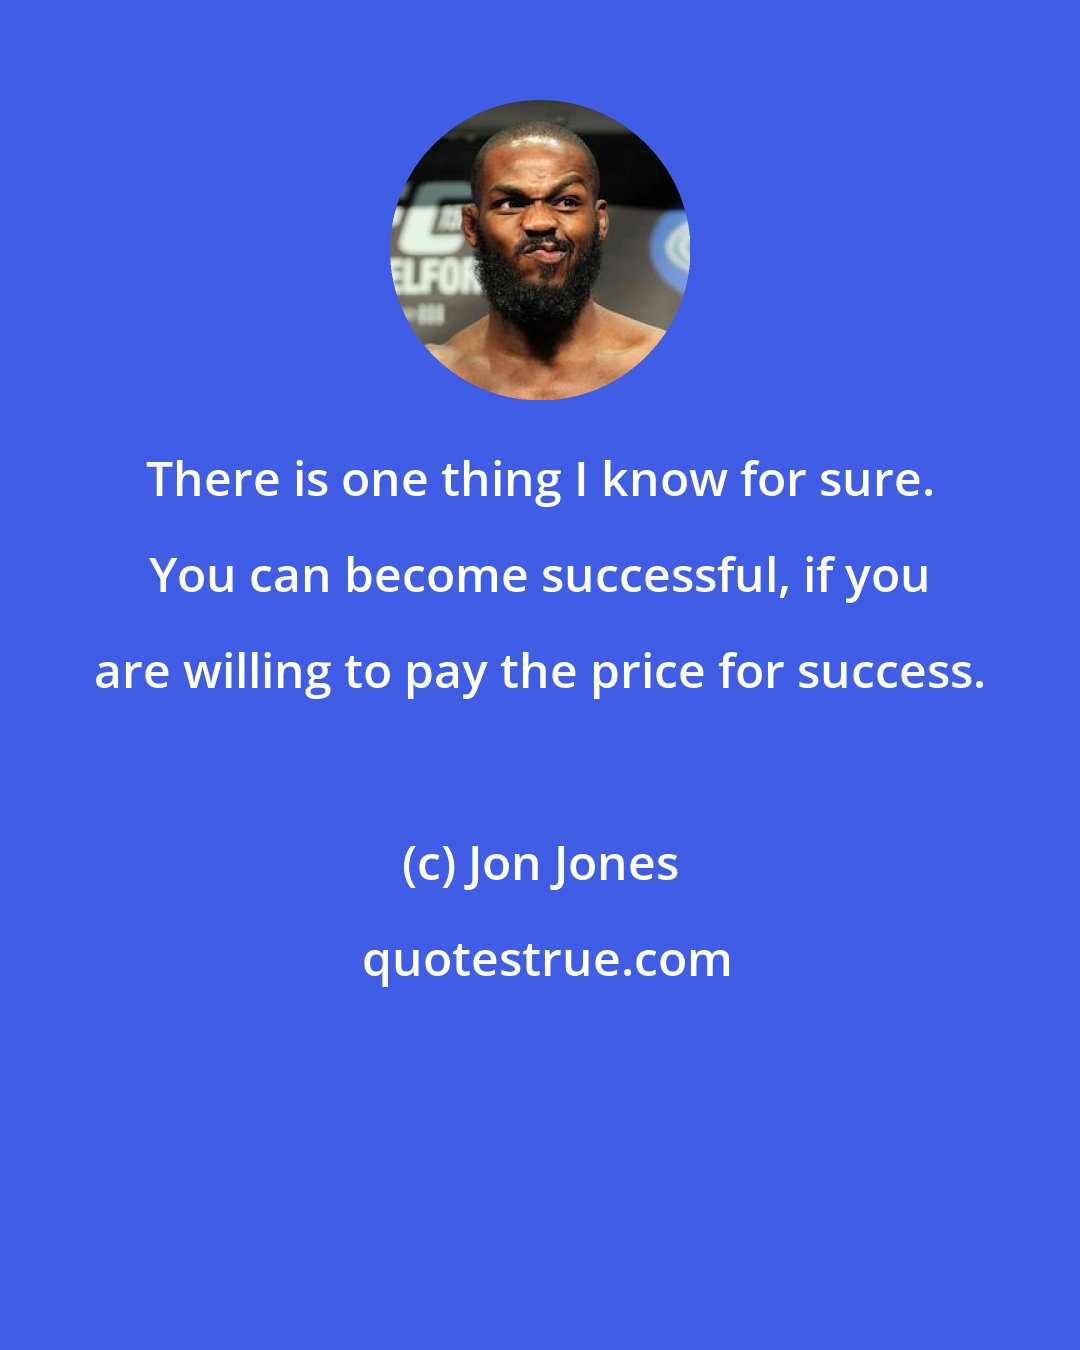 Jon Jones: There is one thing I know for sure. You can become successful, if you are willing to pay the price for success.